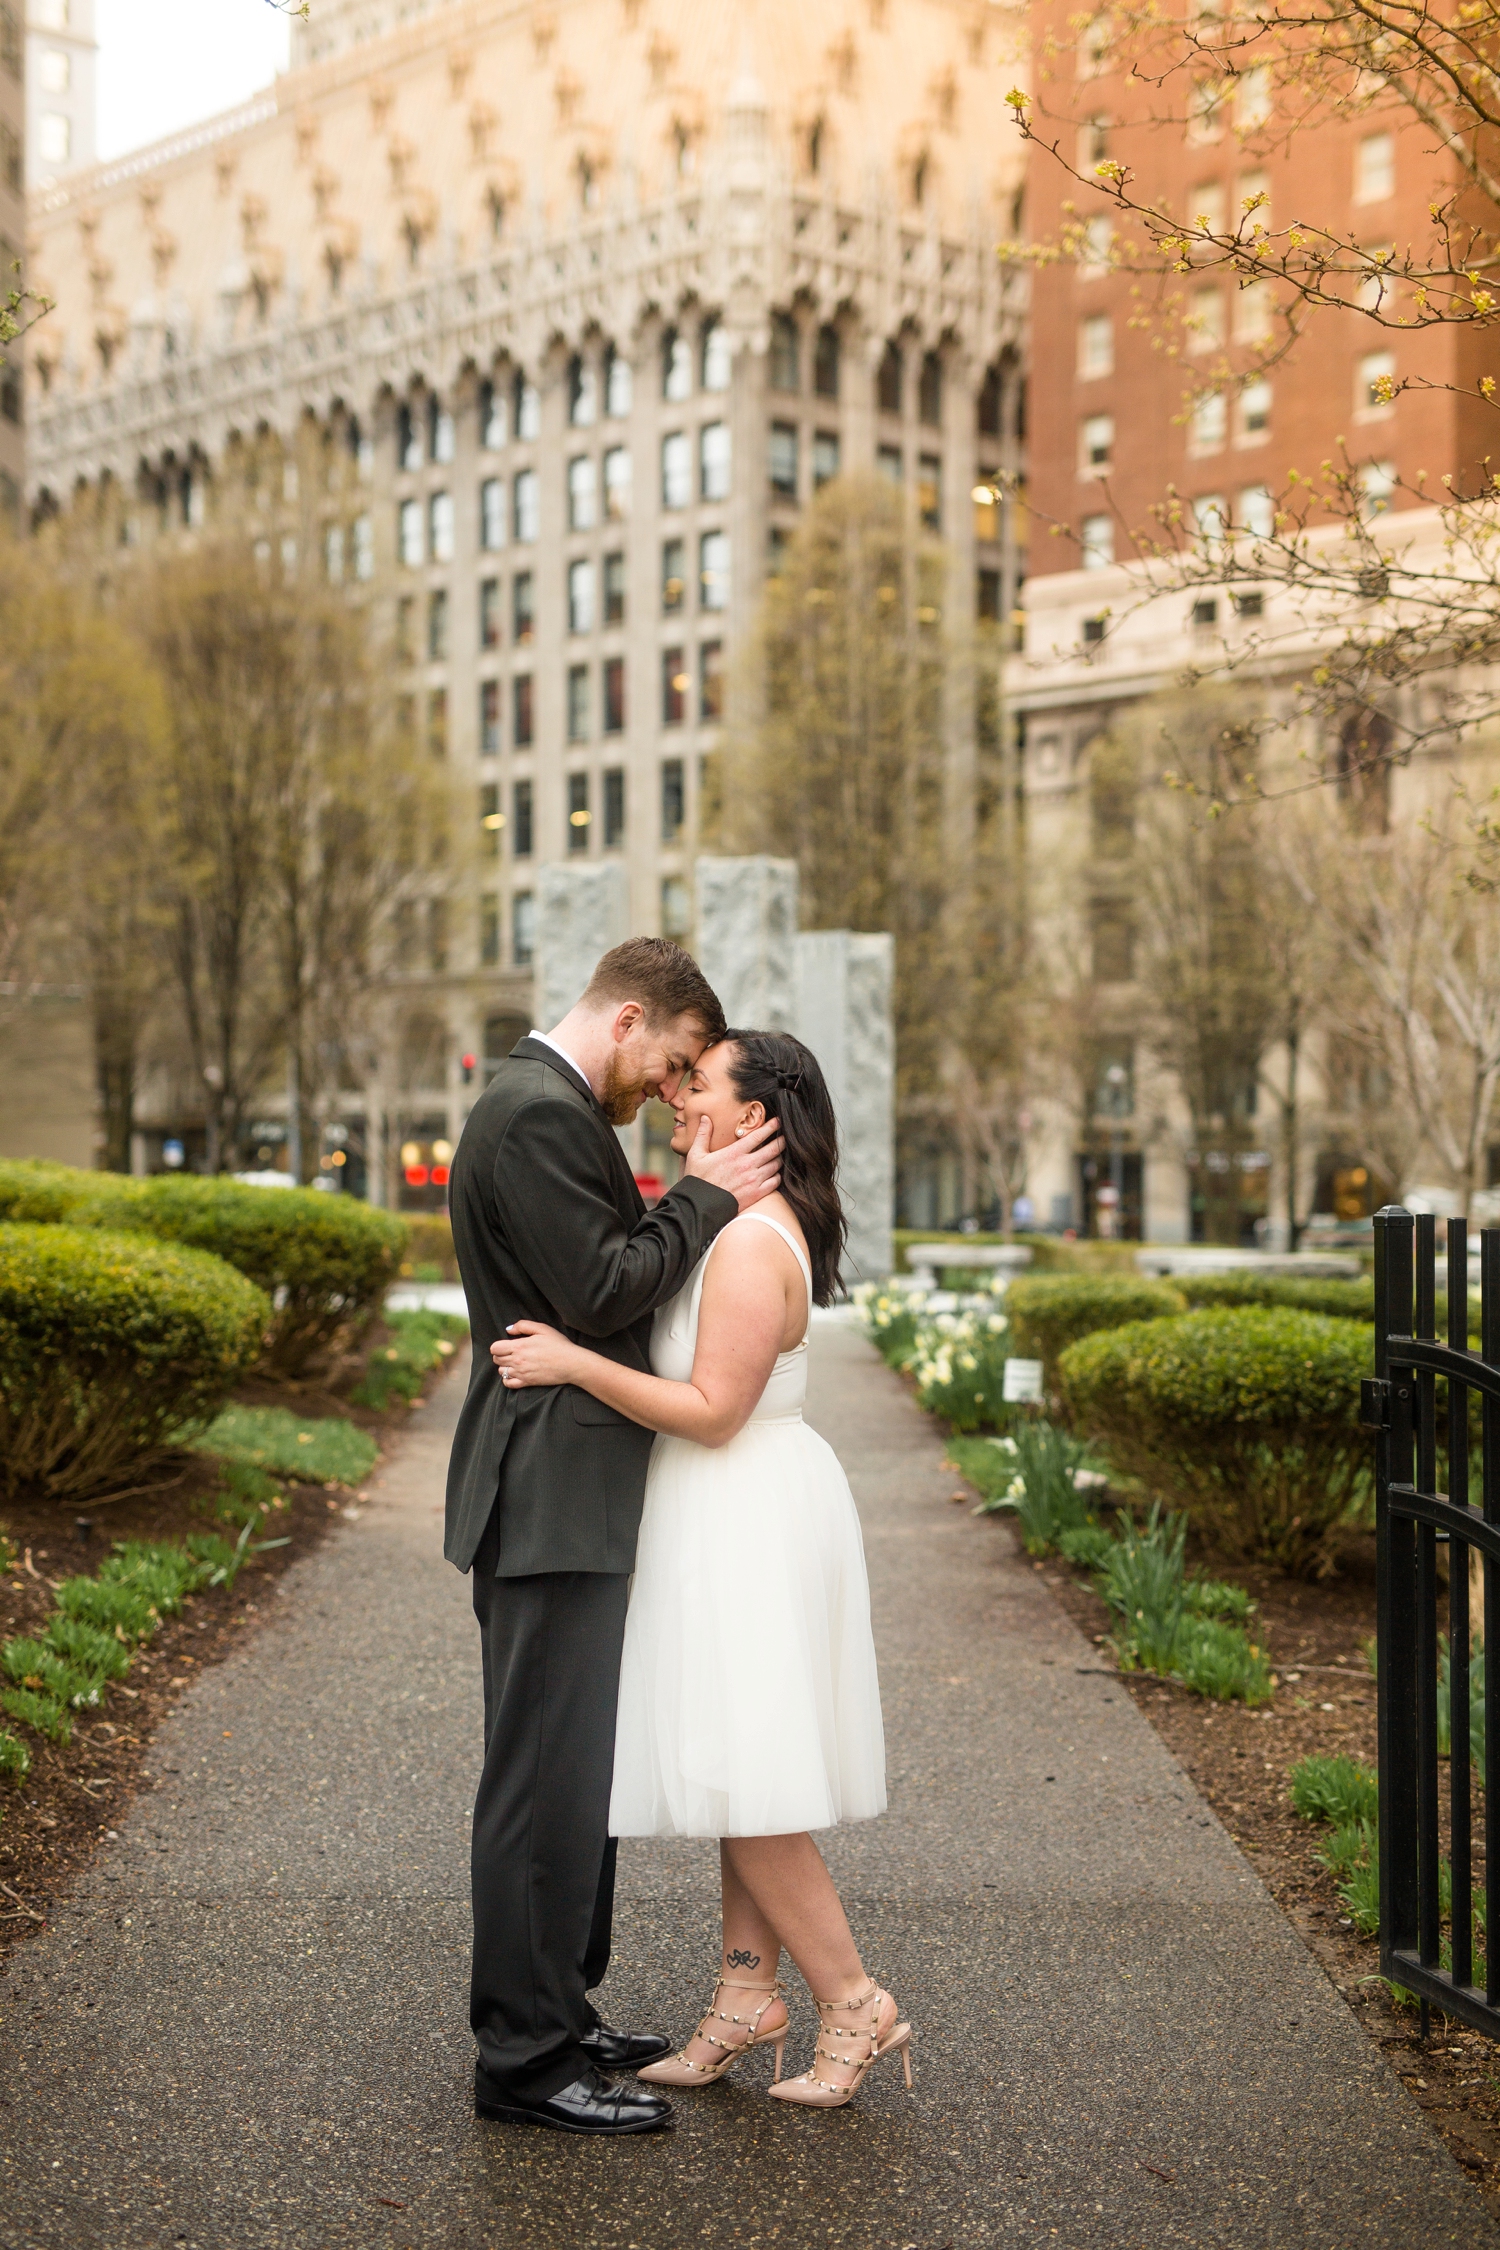 best location for photoshoot in pittsburgh, allegheny county courthouse elopement, downtown pittsburgh elopement, downtown pittsburgh wedding photos